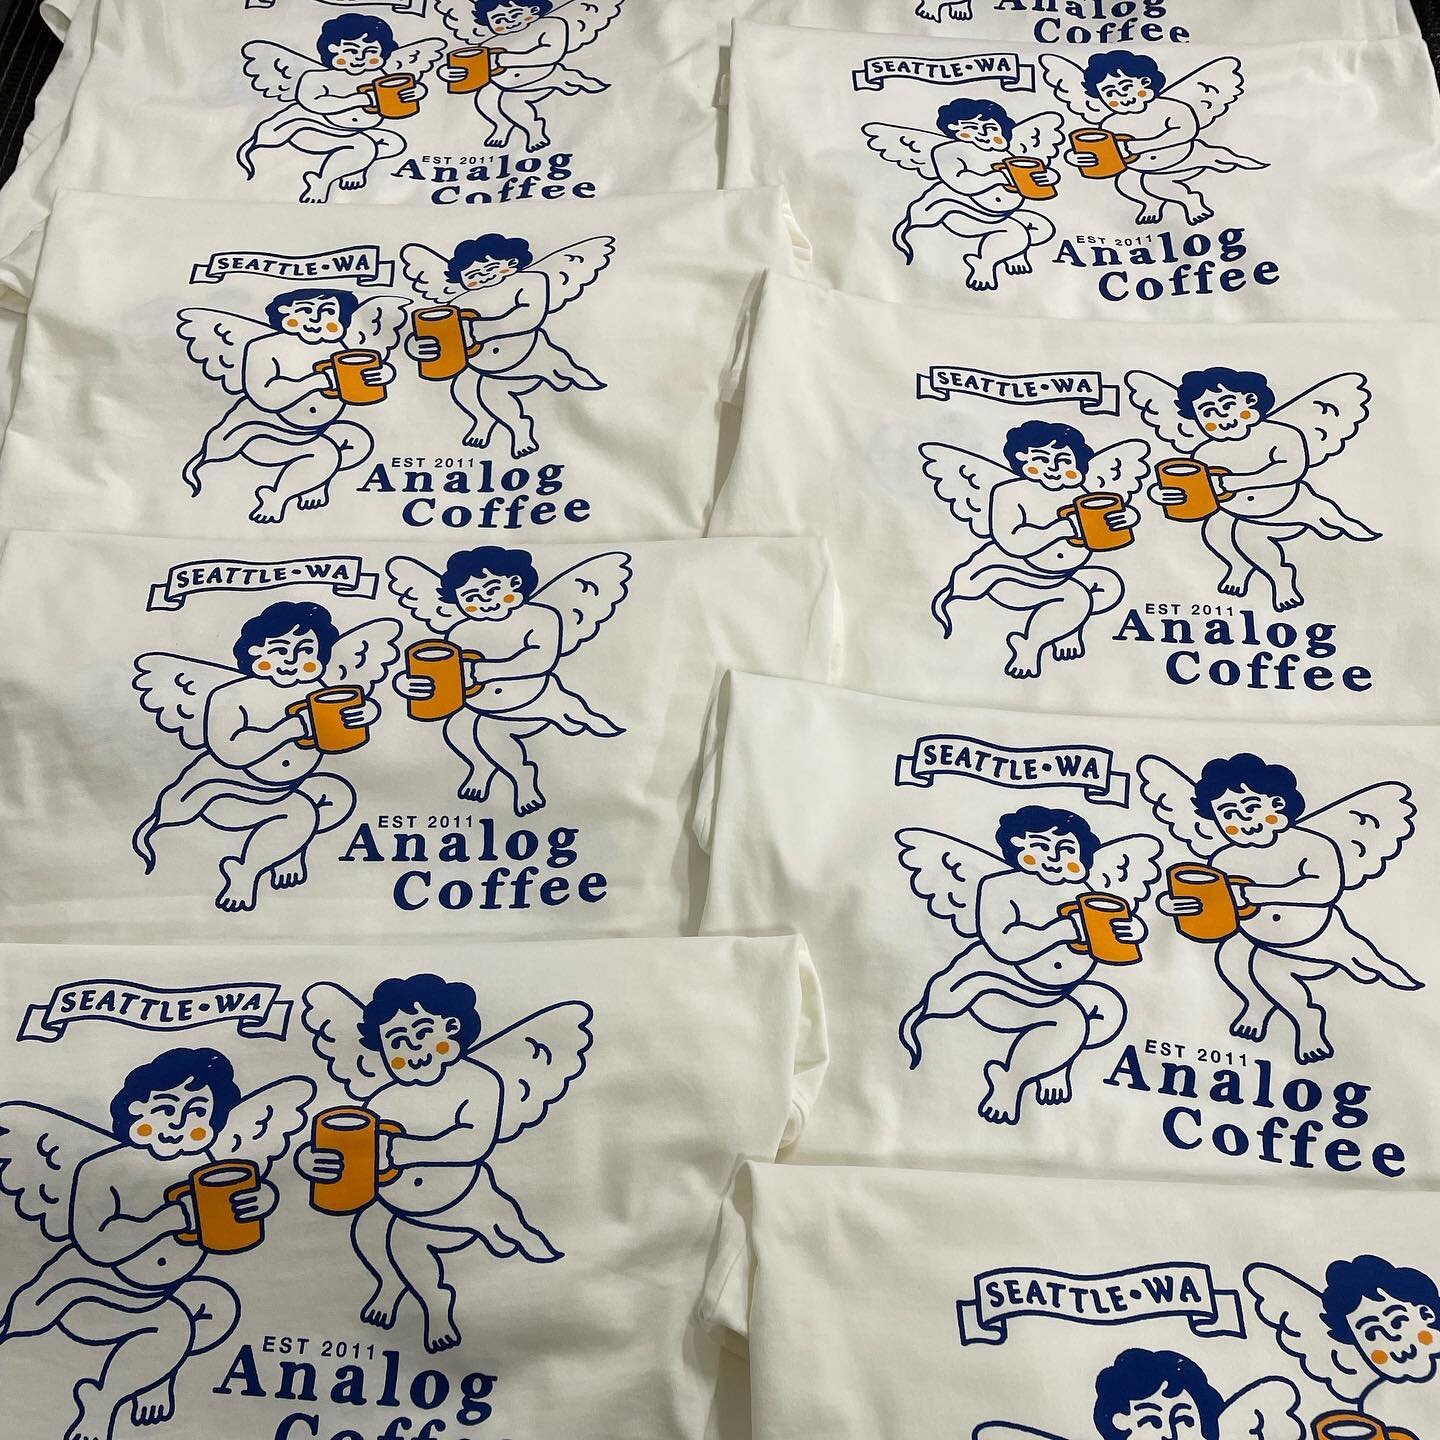 Little coffee angel babies for @analogcoffeeseattle on exceptional @ascolour tees. Super soft water based inks on super soft cotton! 
.
.
.
#waterbasedink #waterbasedprinting #analogcoffee #analogcoffeeseattle #customtees #angelbaby #anglebaby #coffe